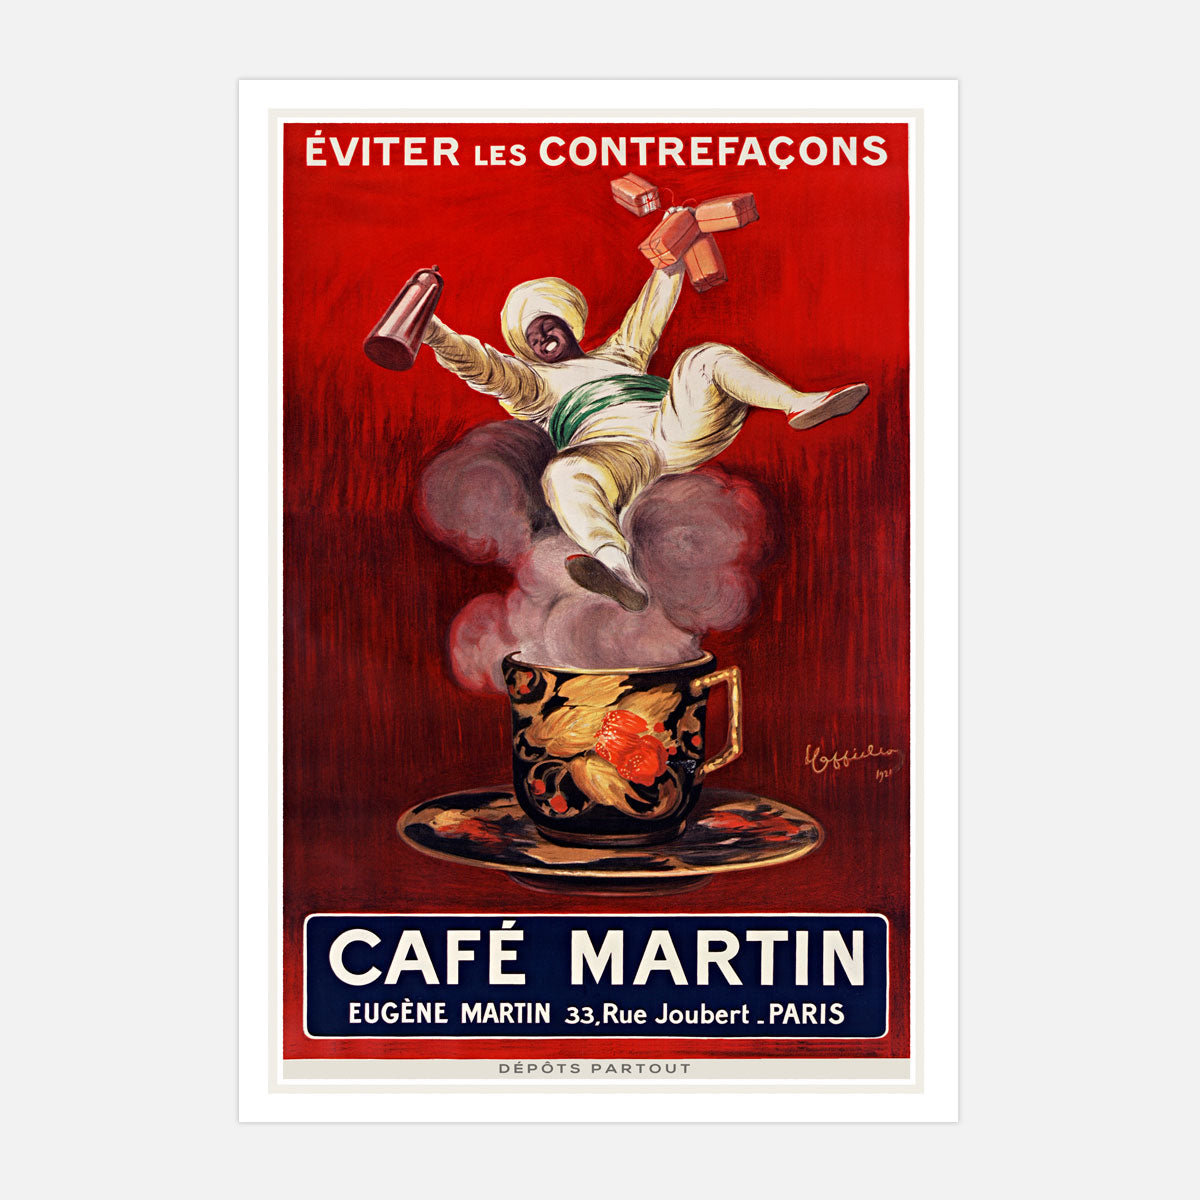 Cafe Martin vintage retro advertising poster from Places We Luv